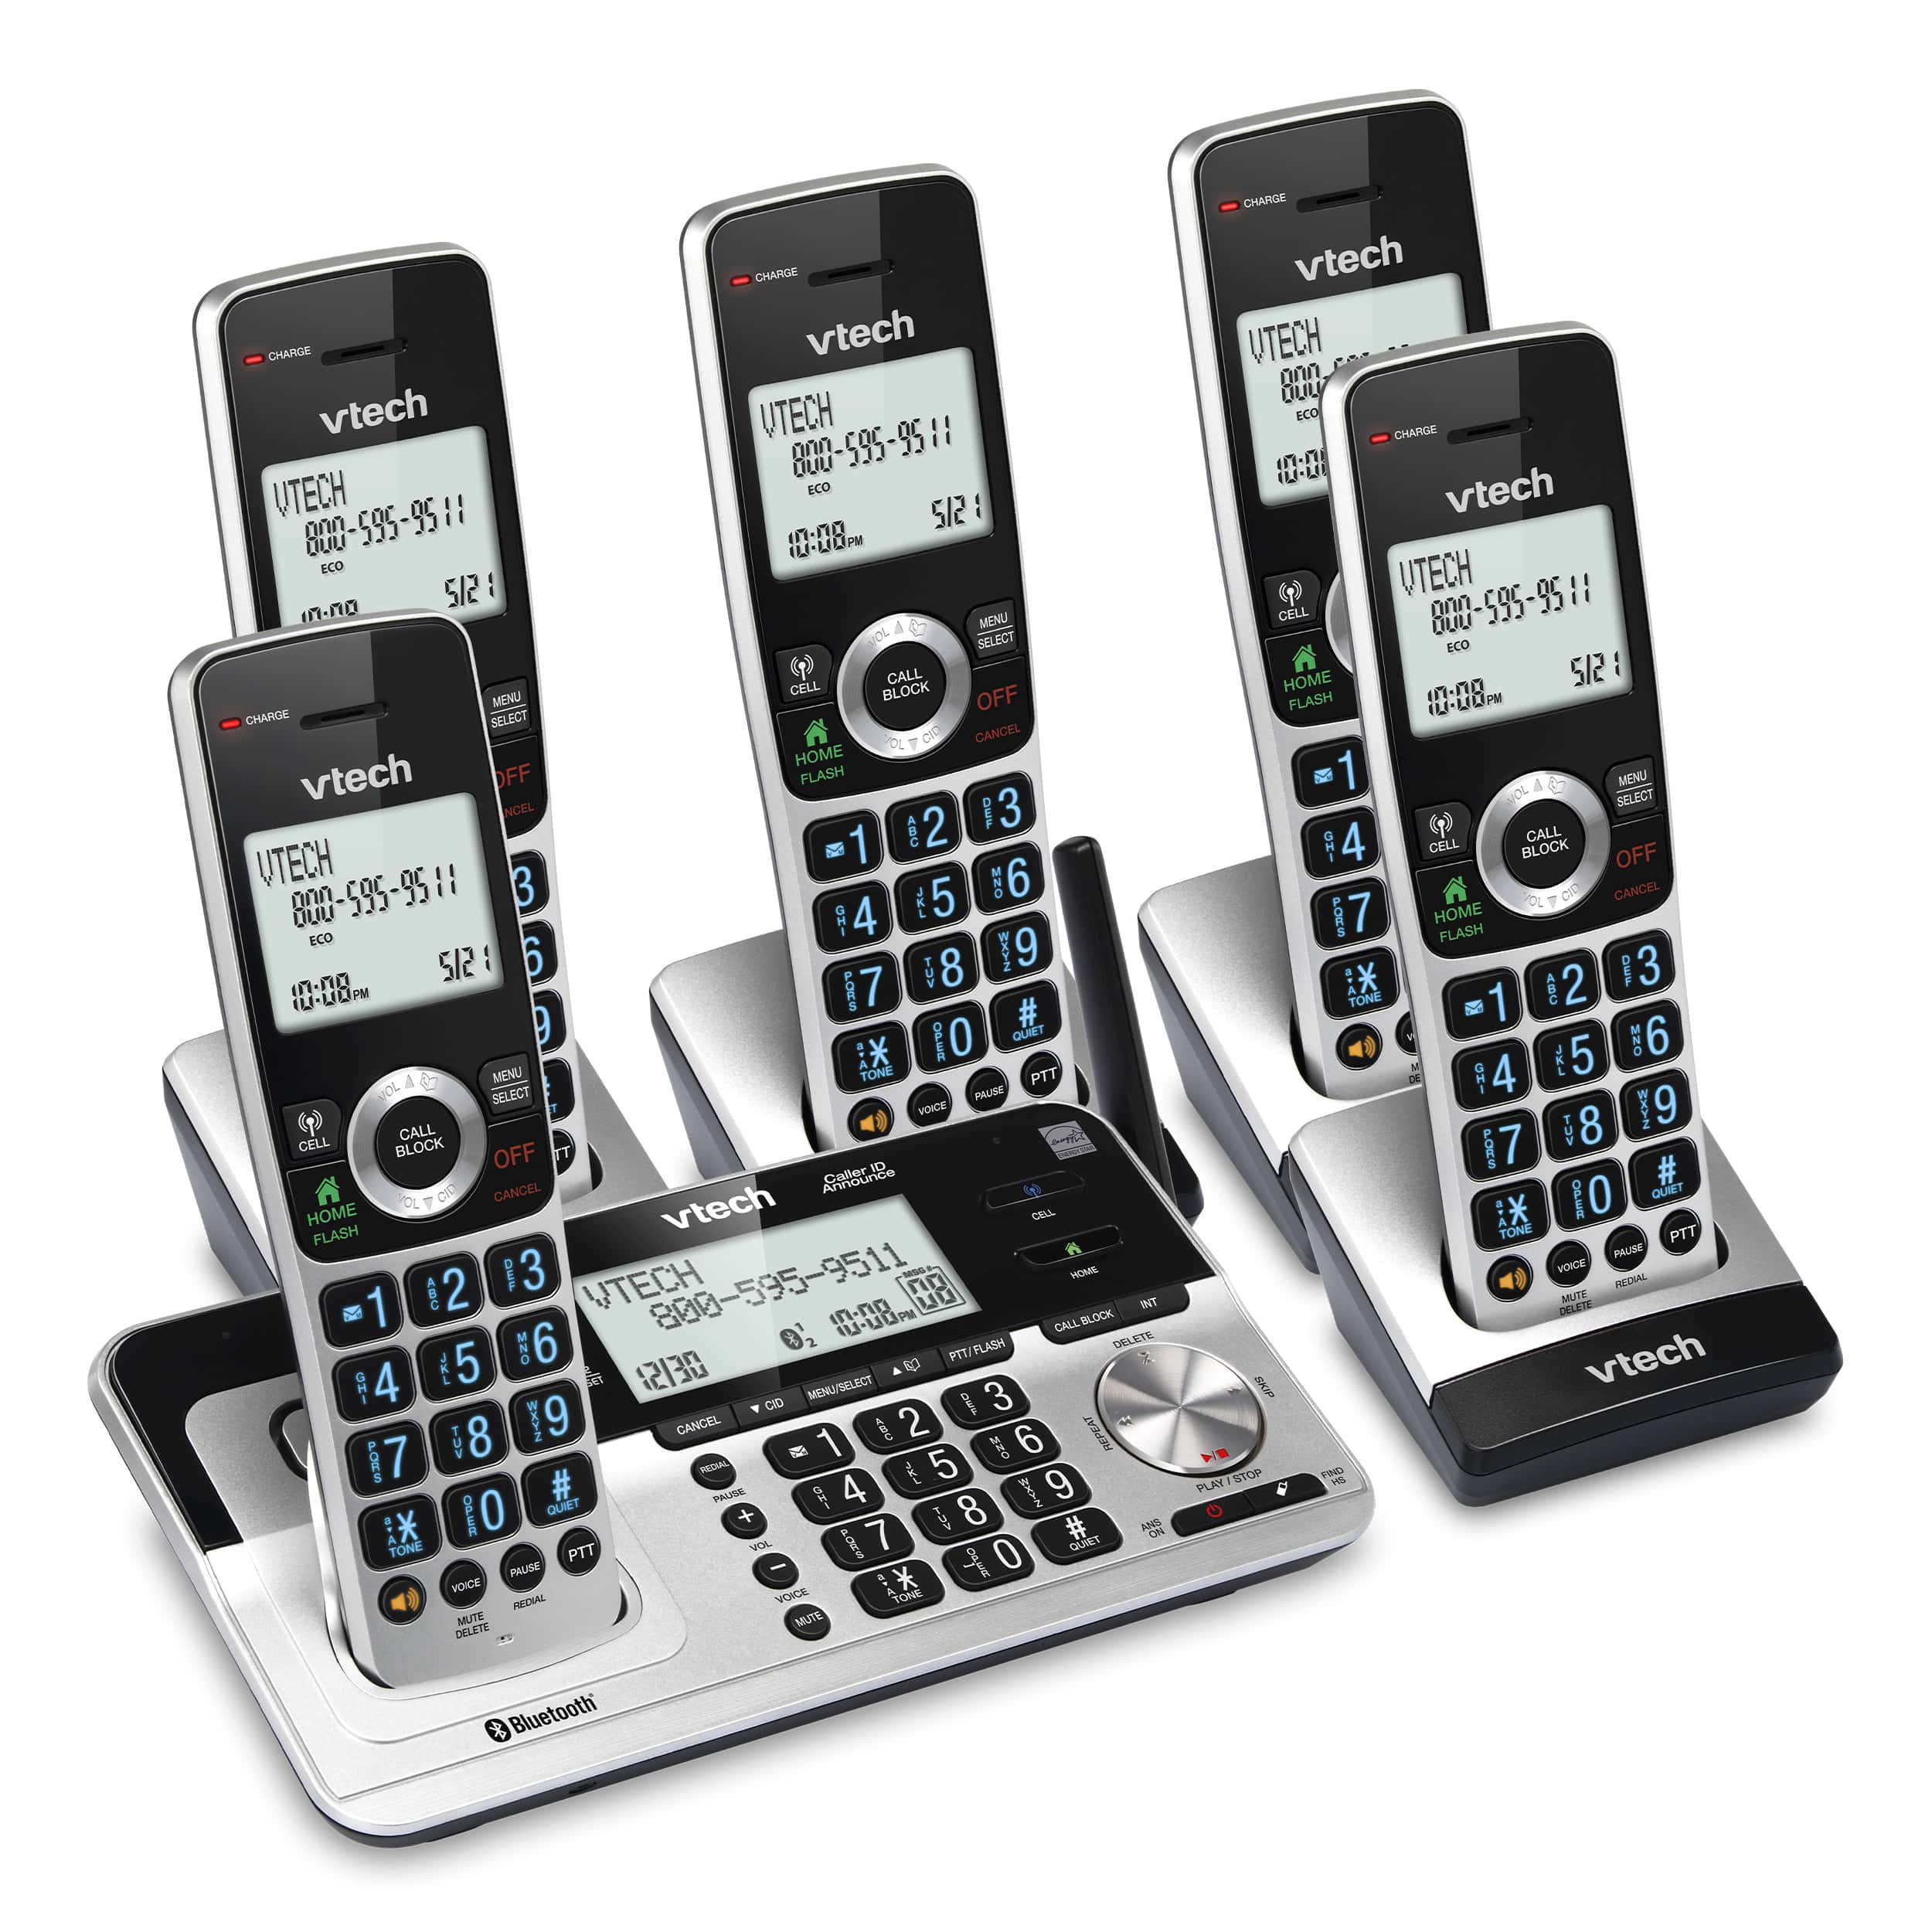 5-Handset Extended Range Expandable Cordless Phone with Bluetooth Connect to Cell, Smart Call Blocker and Answering System - view 3